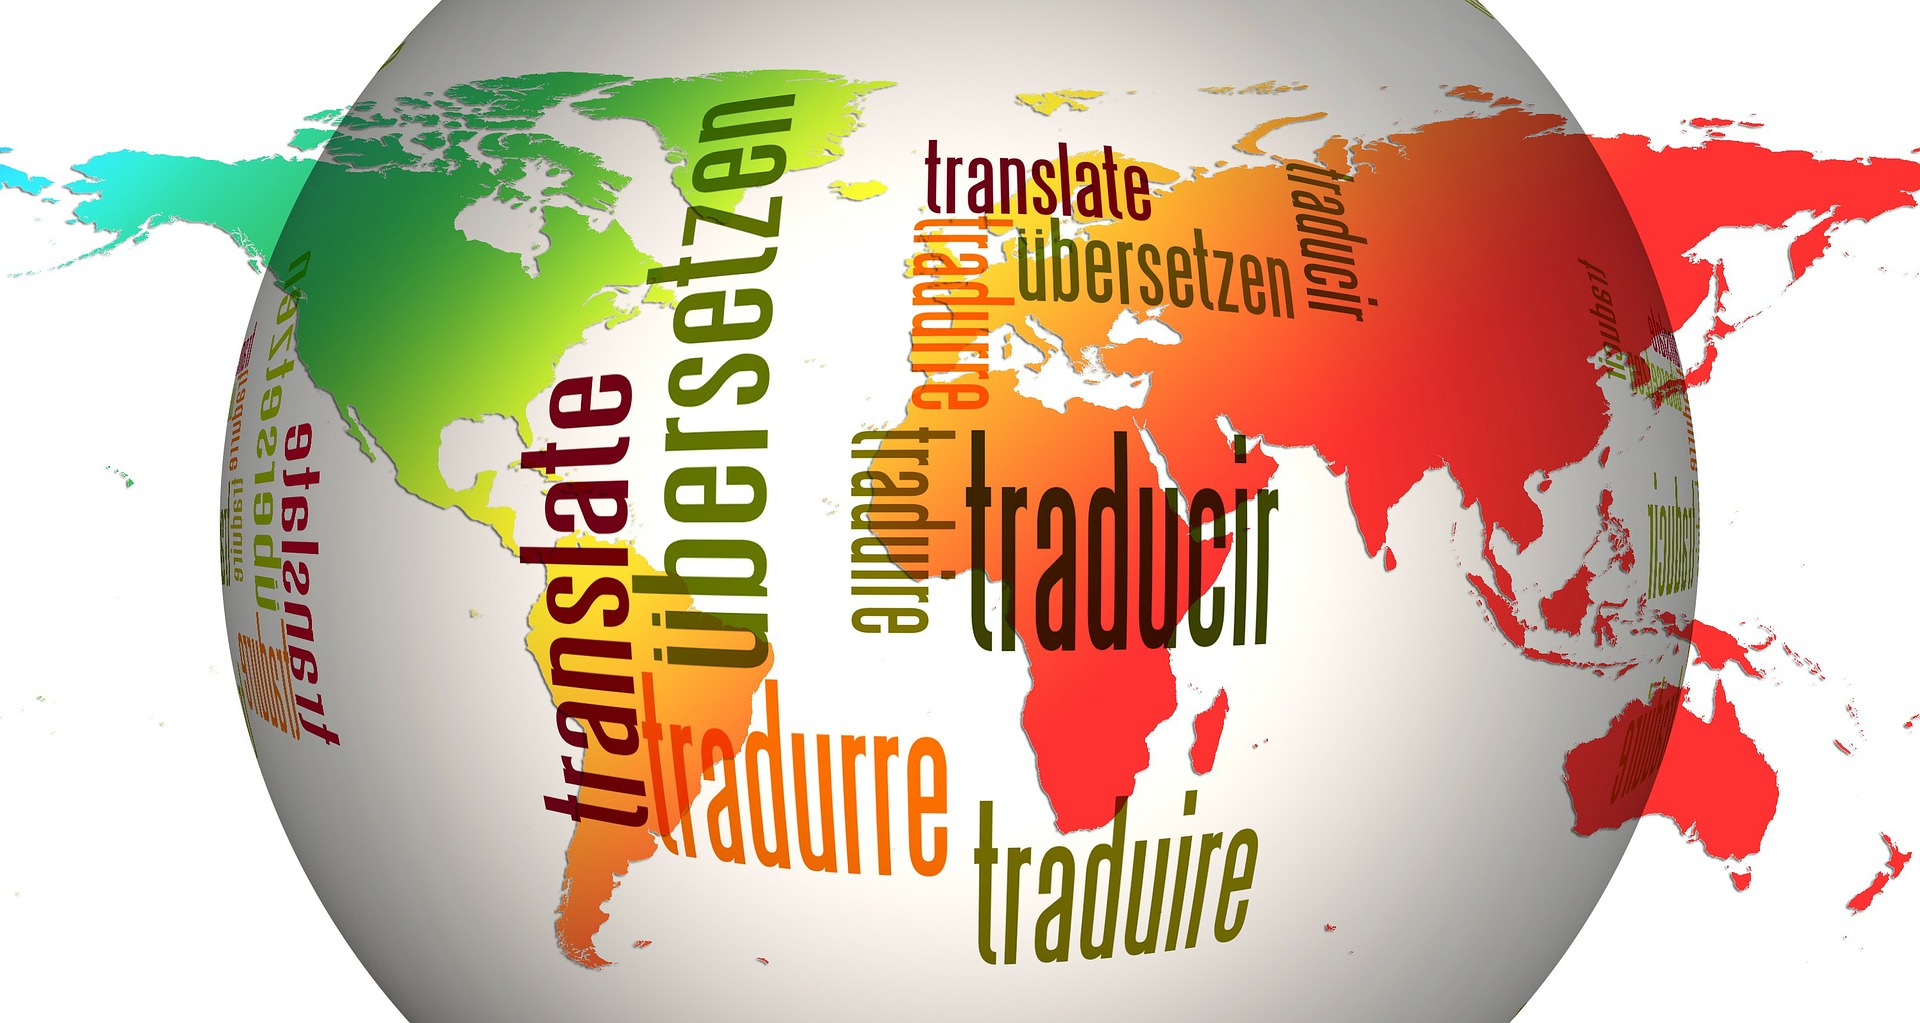 INTERNATIONAL MARKETS SPECIAL FEATURE: WHICH LANGUAGES SHOULD CORPORATE MATERIALS BE TRANSLATED INTO?